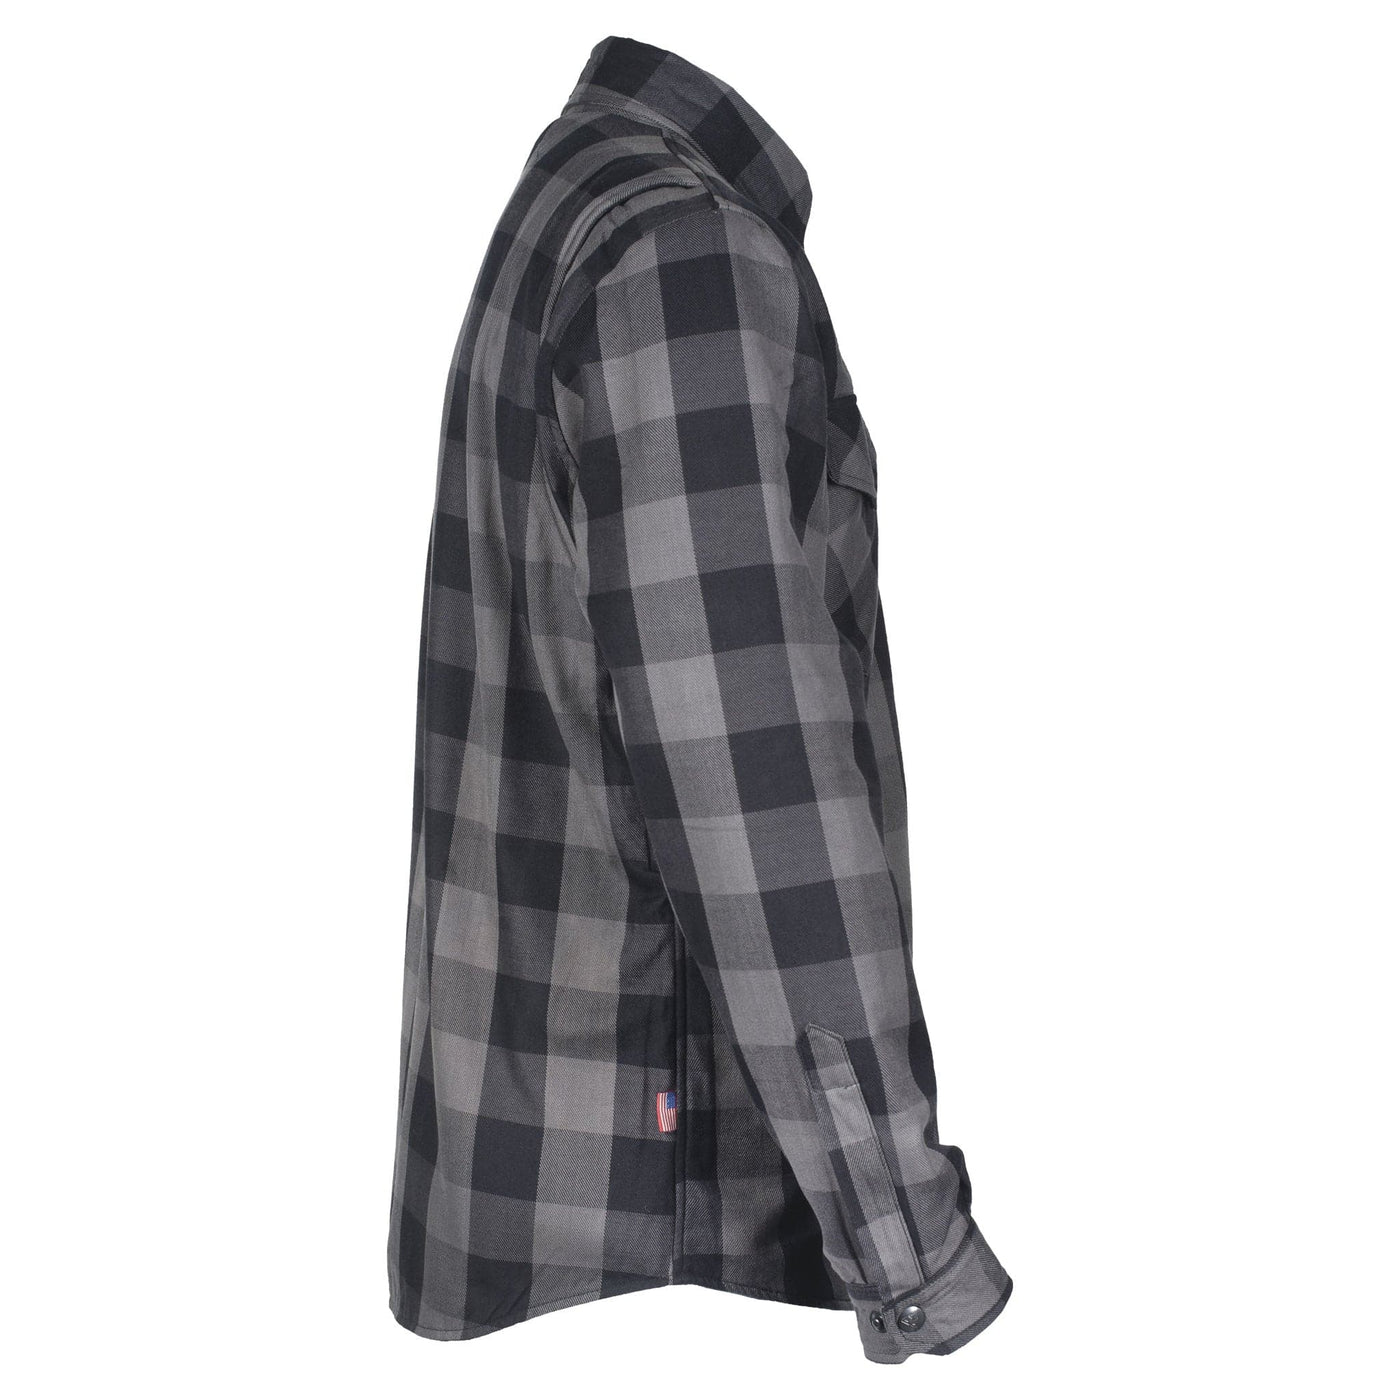 Protective Flannel Shirt with Pads - Grey Checkered